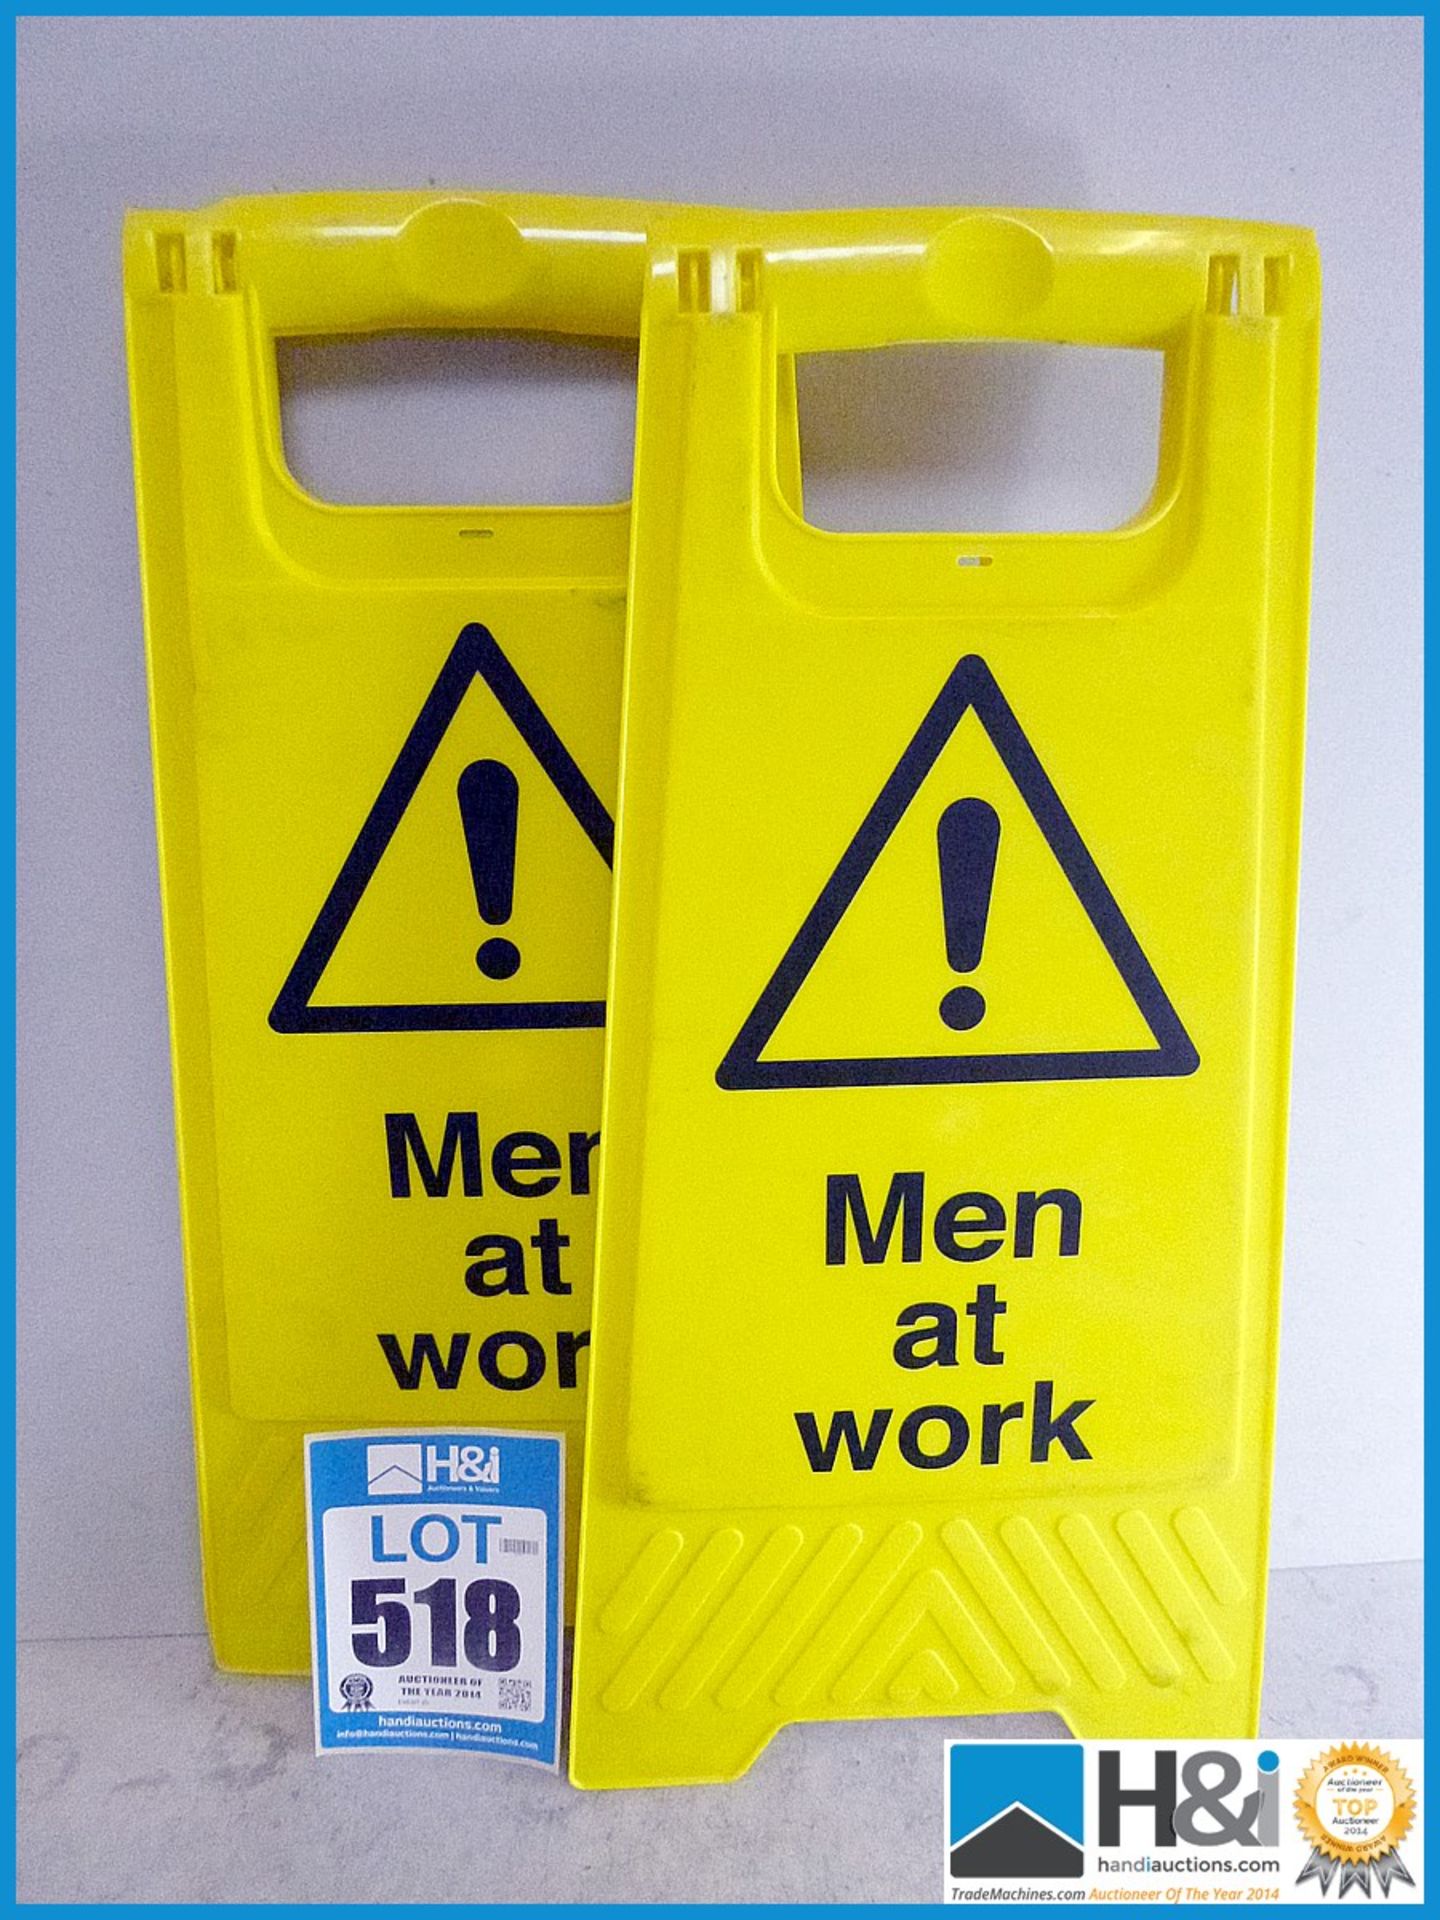 X2 men at work safety signs free standing. Appraisal: New, unused in original packaging. Viewing